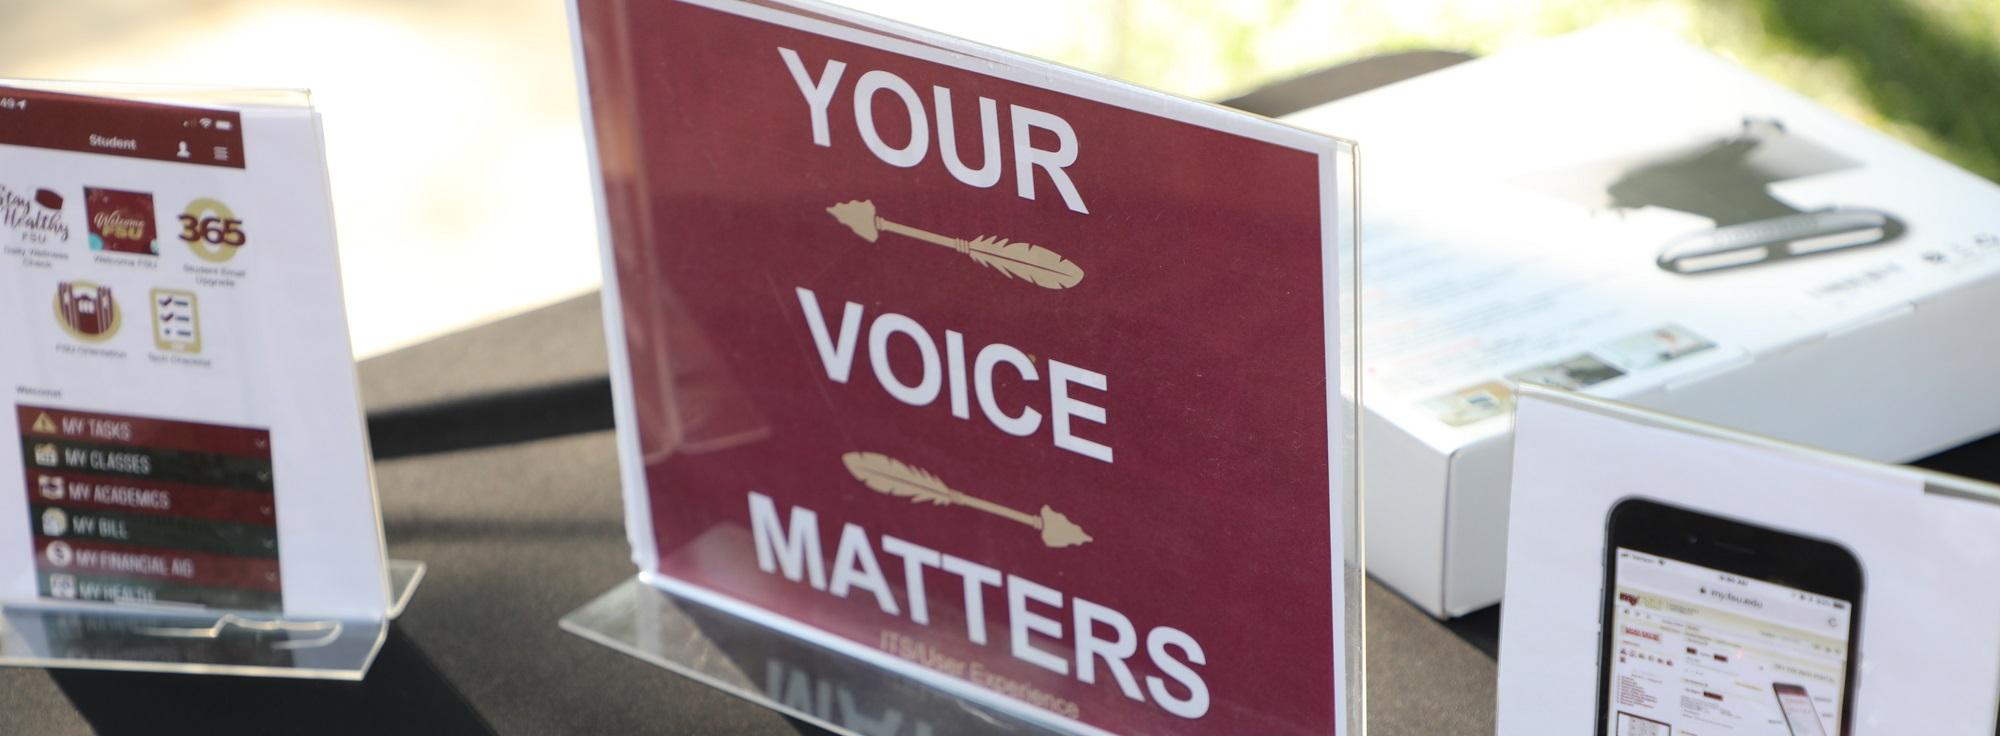 Your Voice Matters booth